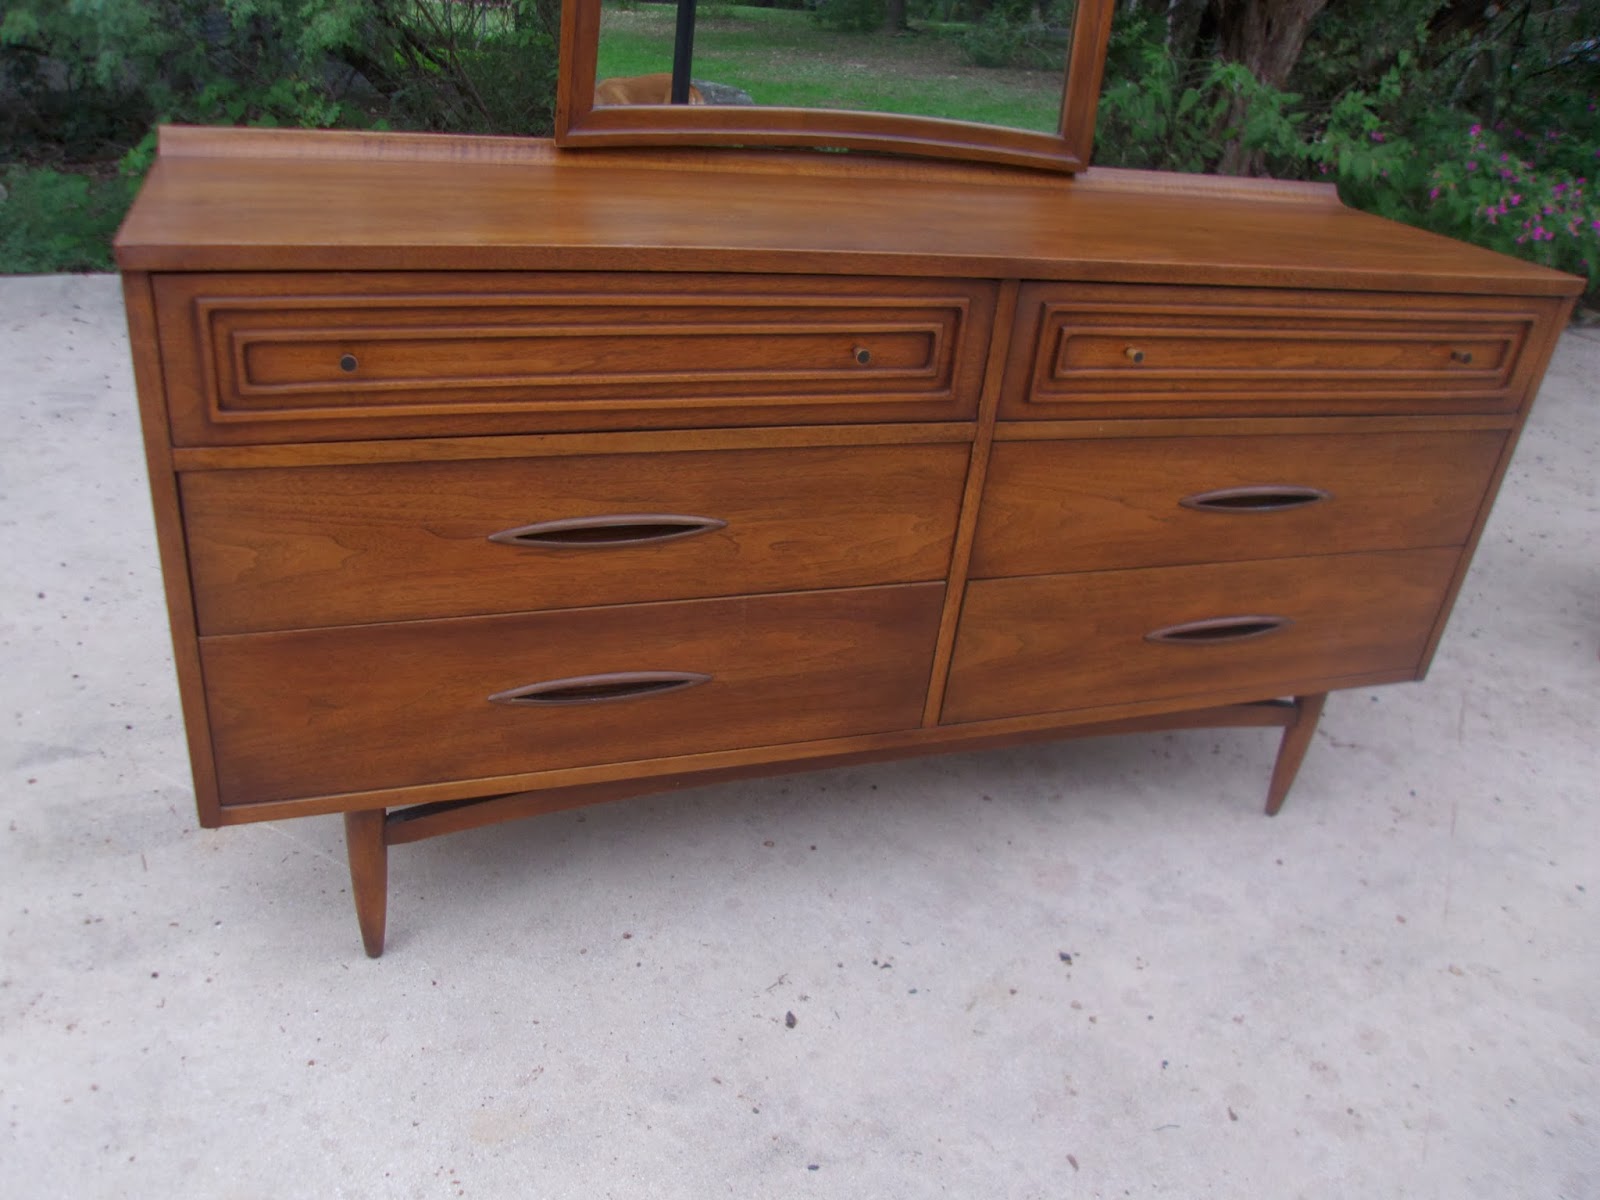 Broyhill Sculptra Dresser And Nightstand For Sale Mad For Mid Century